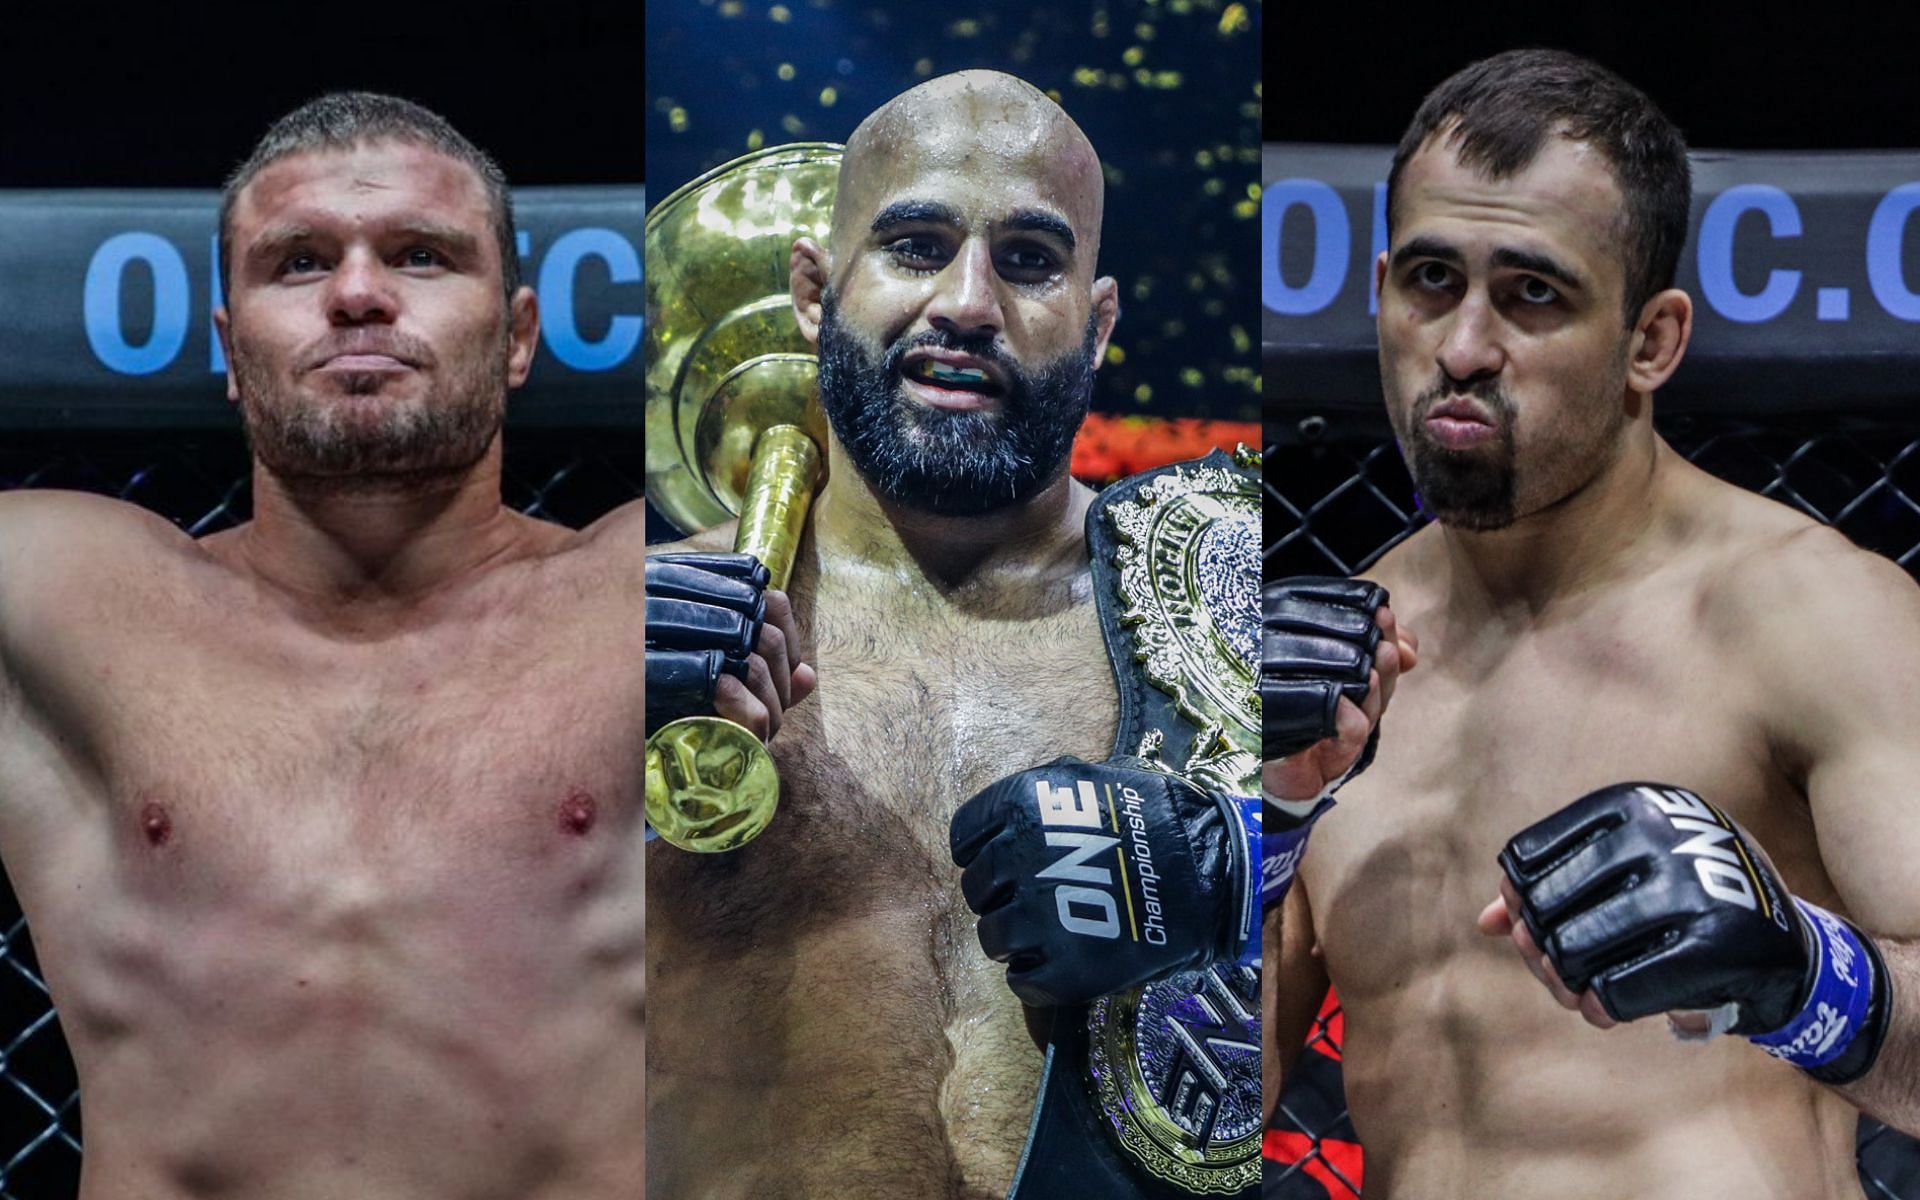 Anatoly Malykhin (left) will be fighting Kirill Grishenko (right) for the interim title after Arjan Bhullar (center) refuses to defend the heavyweight belt | Photo: ONE Championship